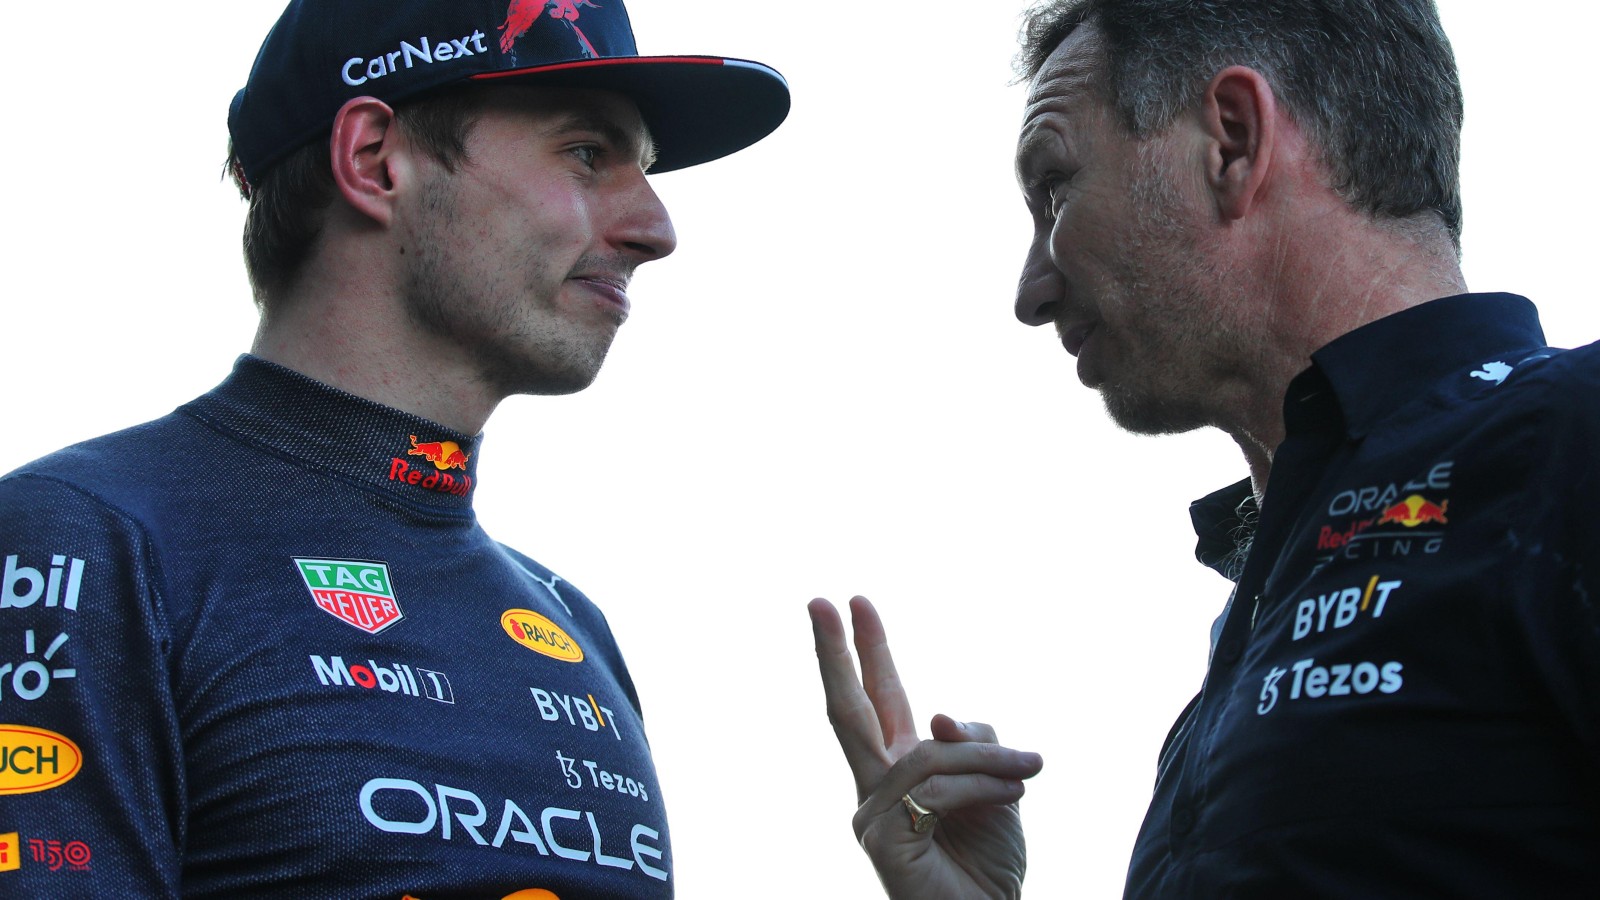 Max Verstappen and Christian Horner, Red Bull, talk. United States, May 2022.